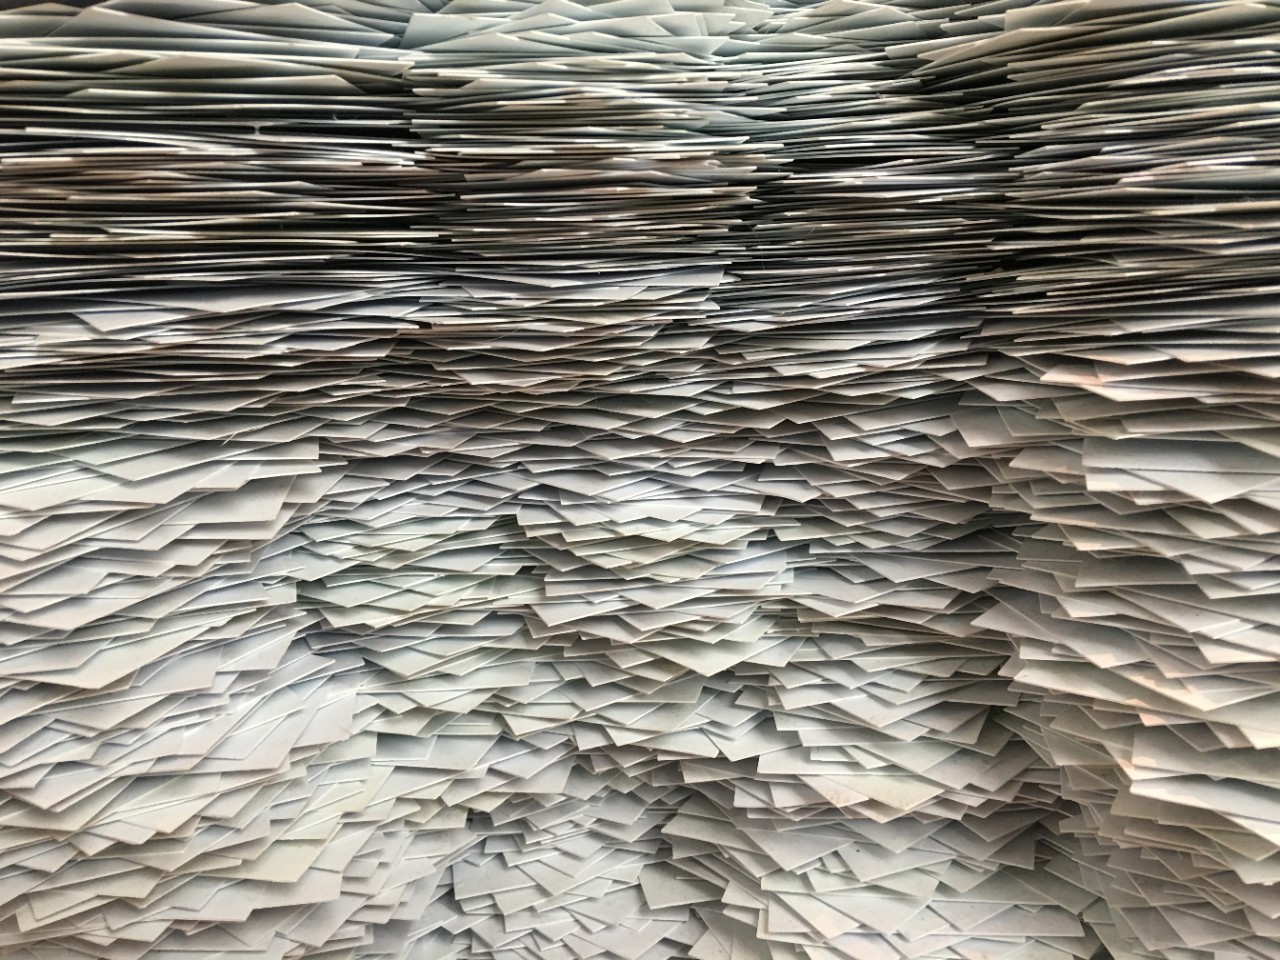 A stack of papers.